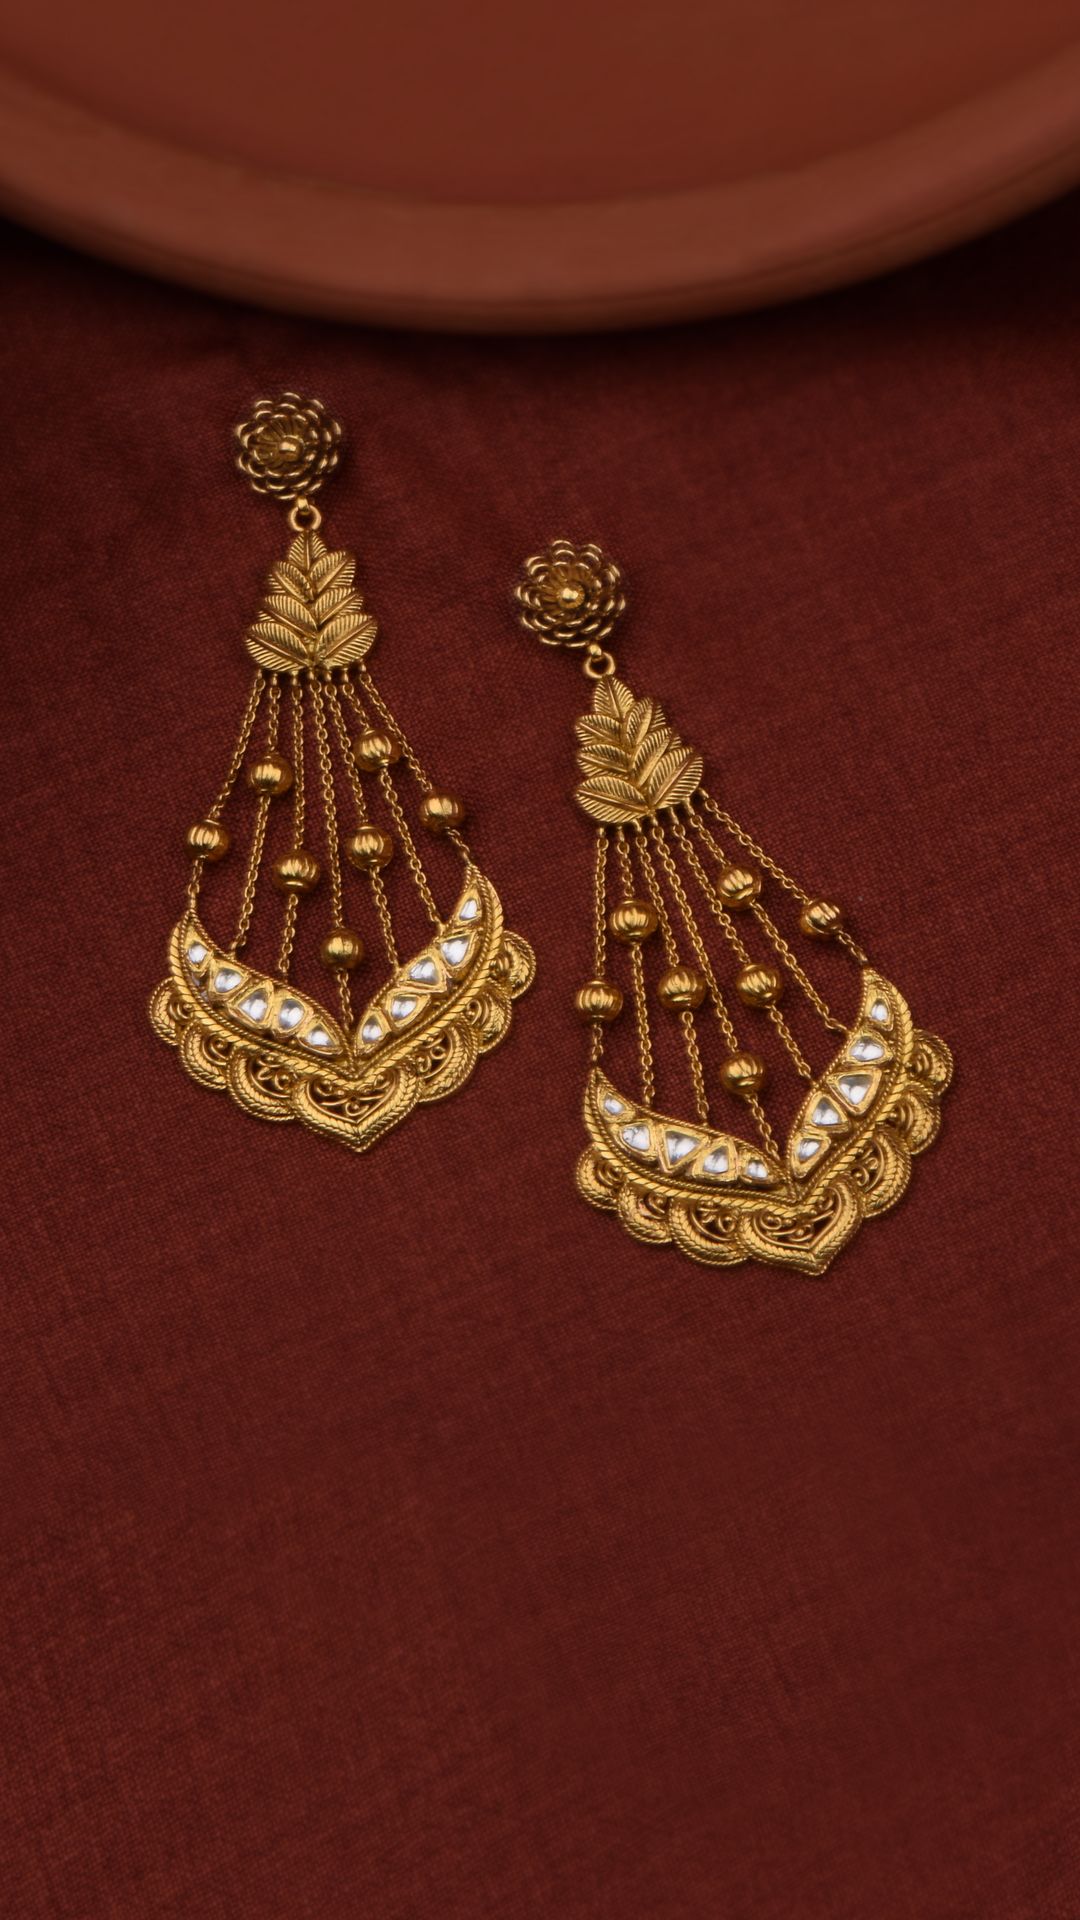 ERG122  Bridal Wear Traditional Gold Plated Jhumkas Earrings for Women   Buy Original Chidambaram Covering product at Wholesale Price Online  shopping for guarantee South Indian Gold Plated Jewellery